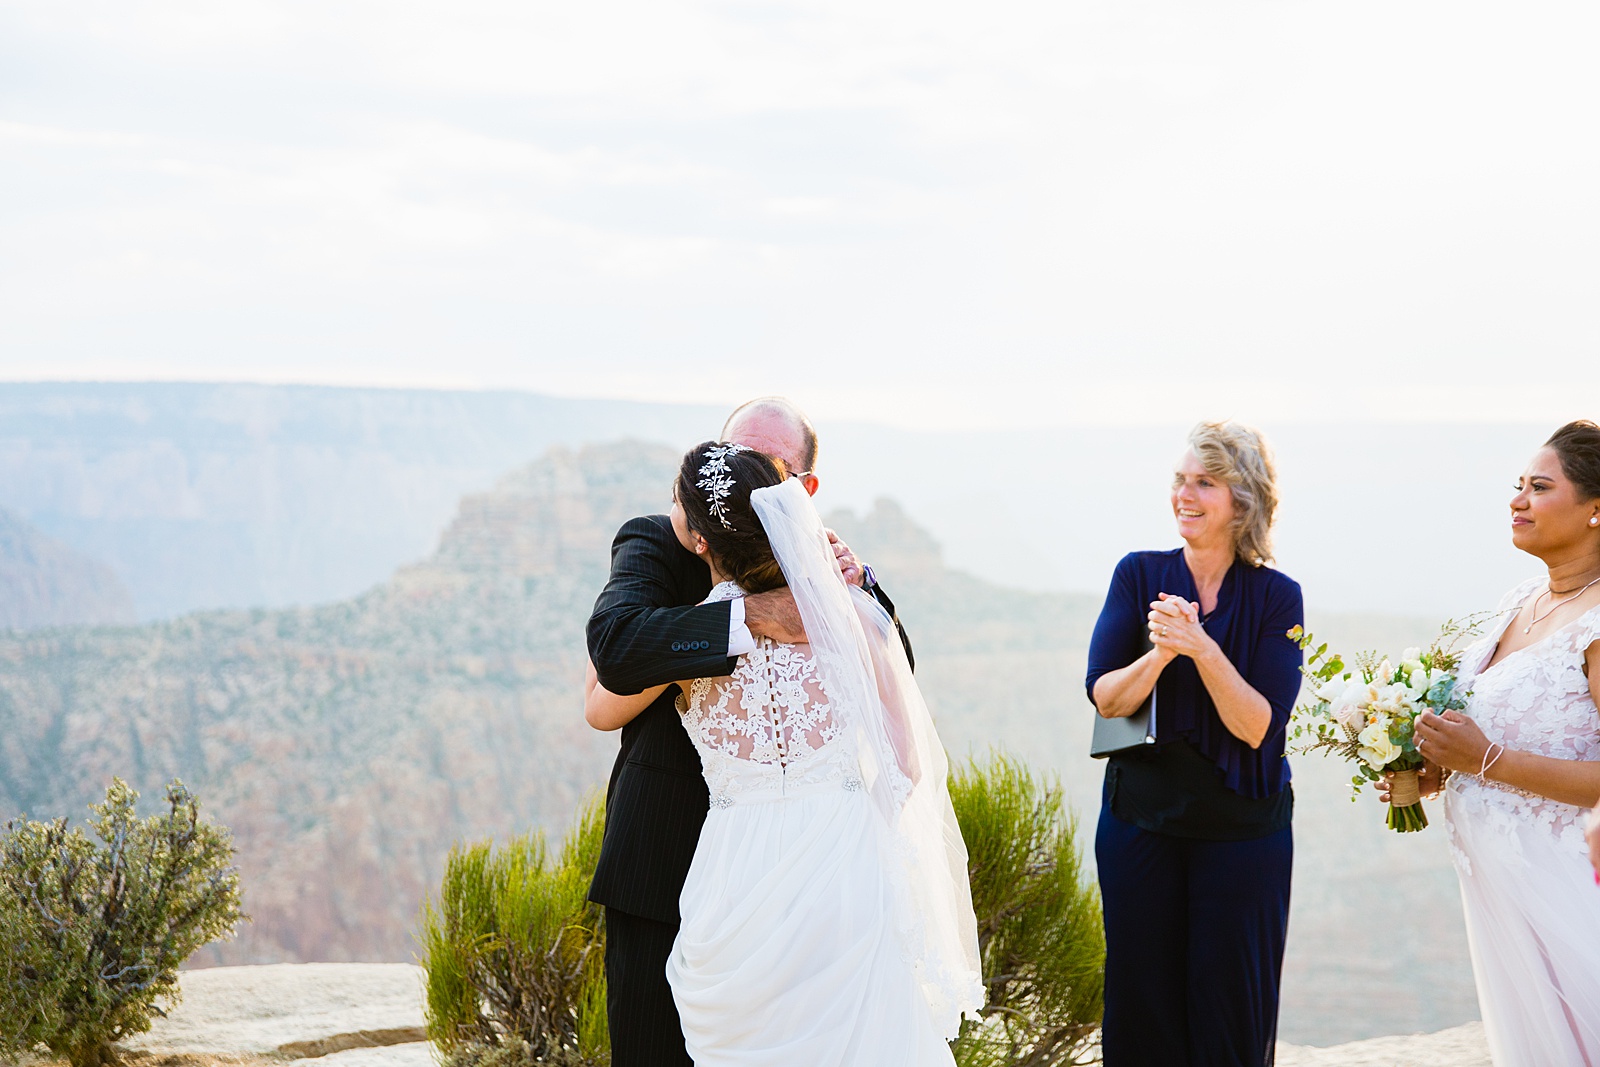 Bride hugging her father at the end of the aisle by Grand Canyon Elopement Photographer PMA Photography.